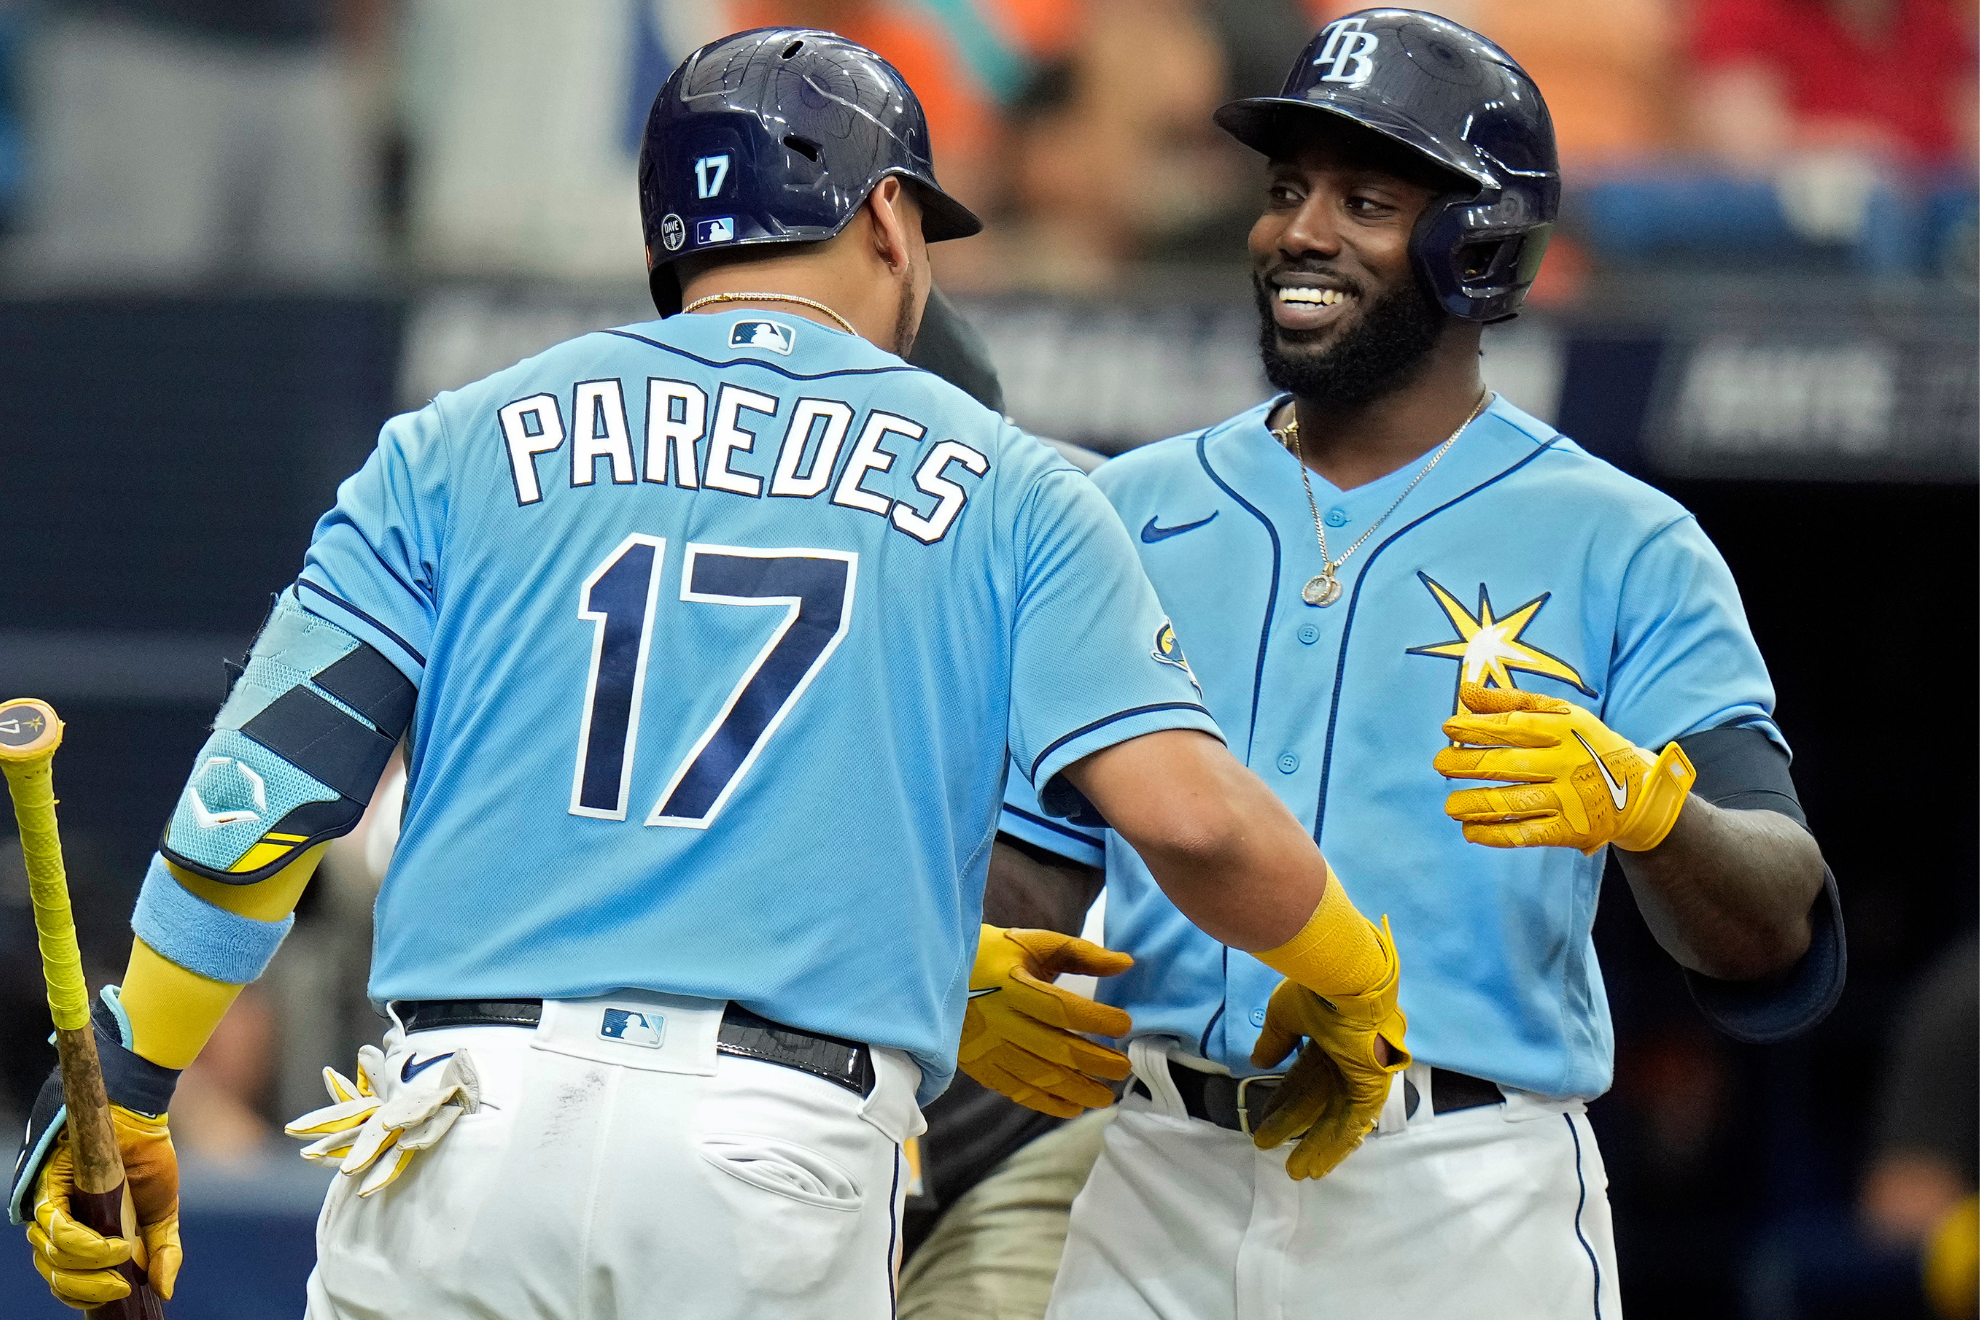 Arozarena, Paredes, and the Rays have continued to sizzle at the plate.